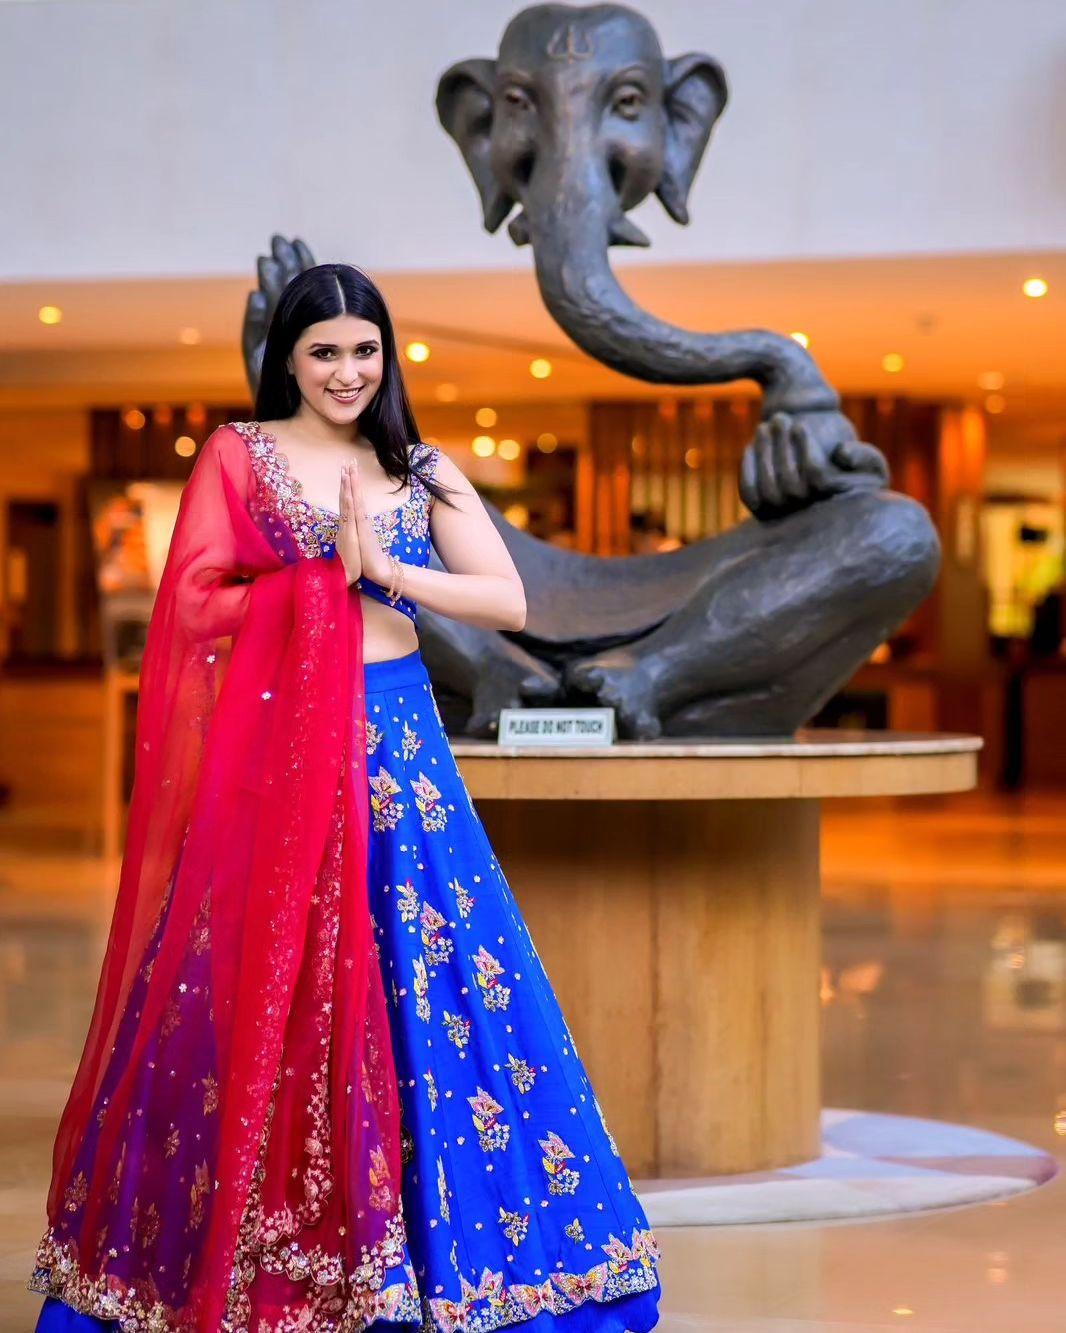 Mannara Chopra than lost her cool after being questioned for her friendship with Vicky Jain. The actress broke her friendship with almost everyone as and when she saw the requirements